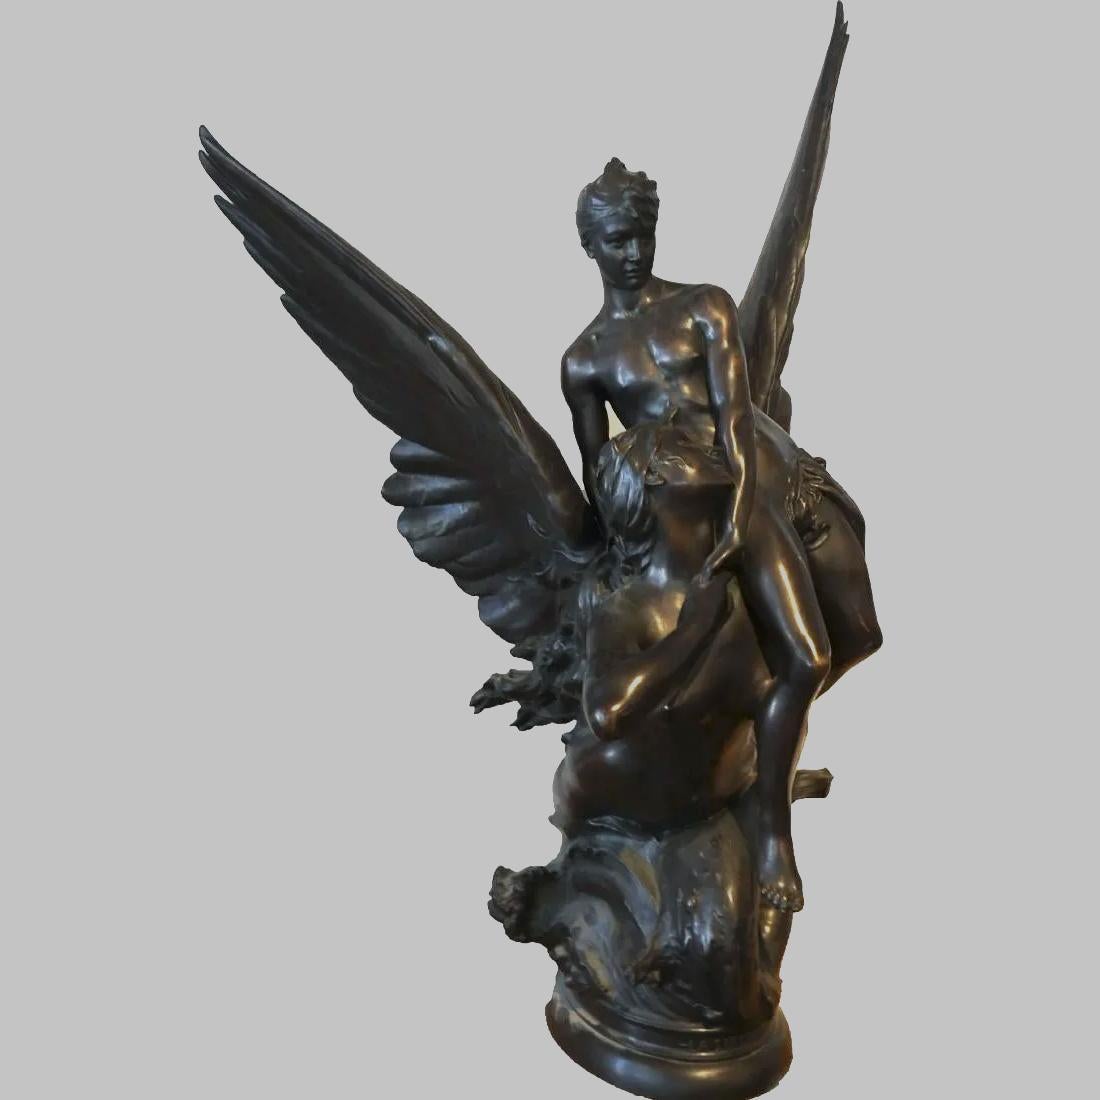 Denys-pierre Puech
French, 1854-1942

La Sirene

Signed ‘D.PUECH’; inscribed F. BARBEDIENNE, Fondeur 

Patinated Bronze circa 19th century
Foundry Cast: Ferdinand Barbedienne
37 1/2 in. x 27 in. x 16 in 


Notes: Puech conceived the idea